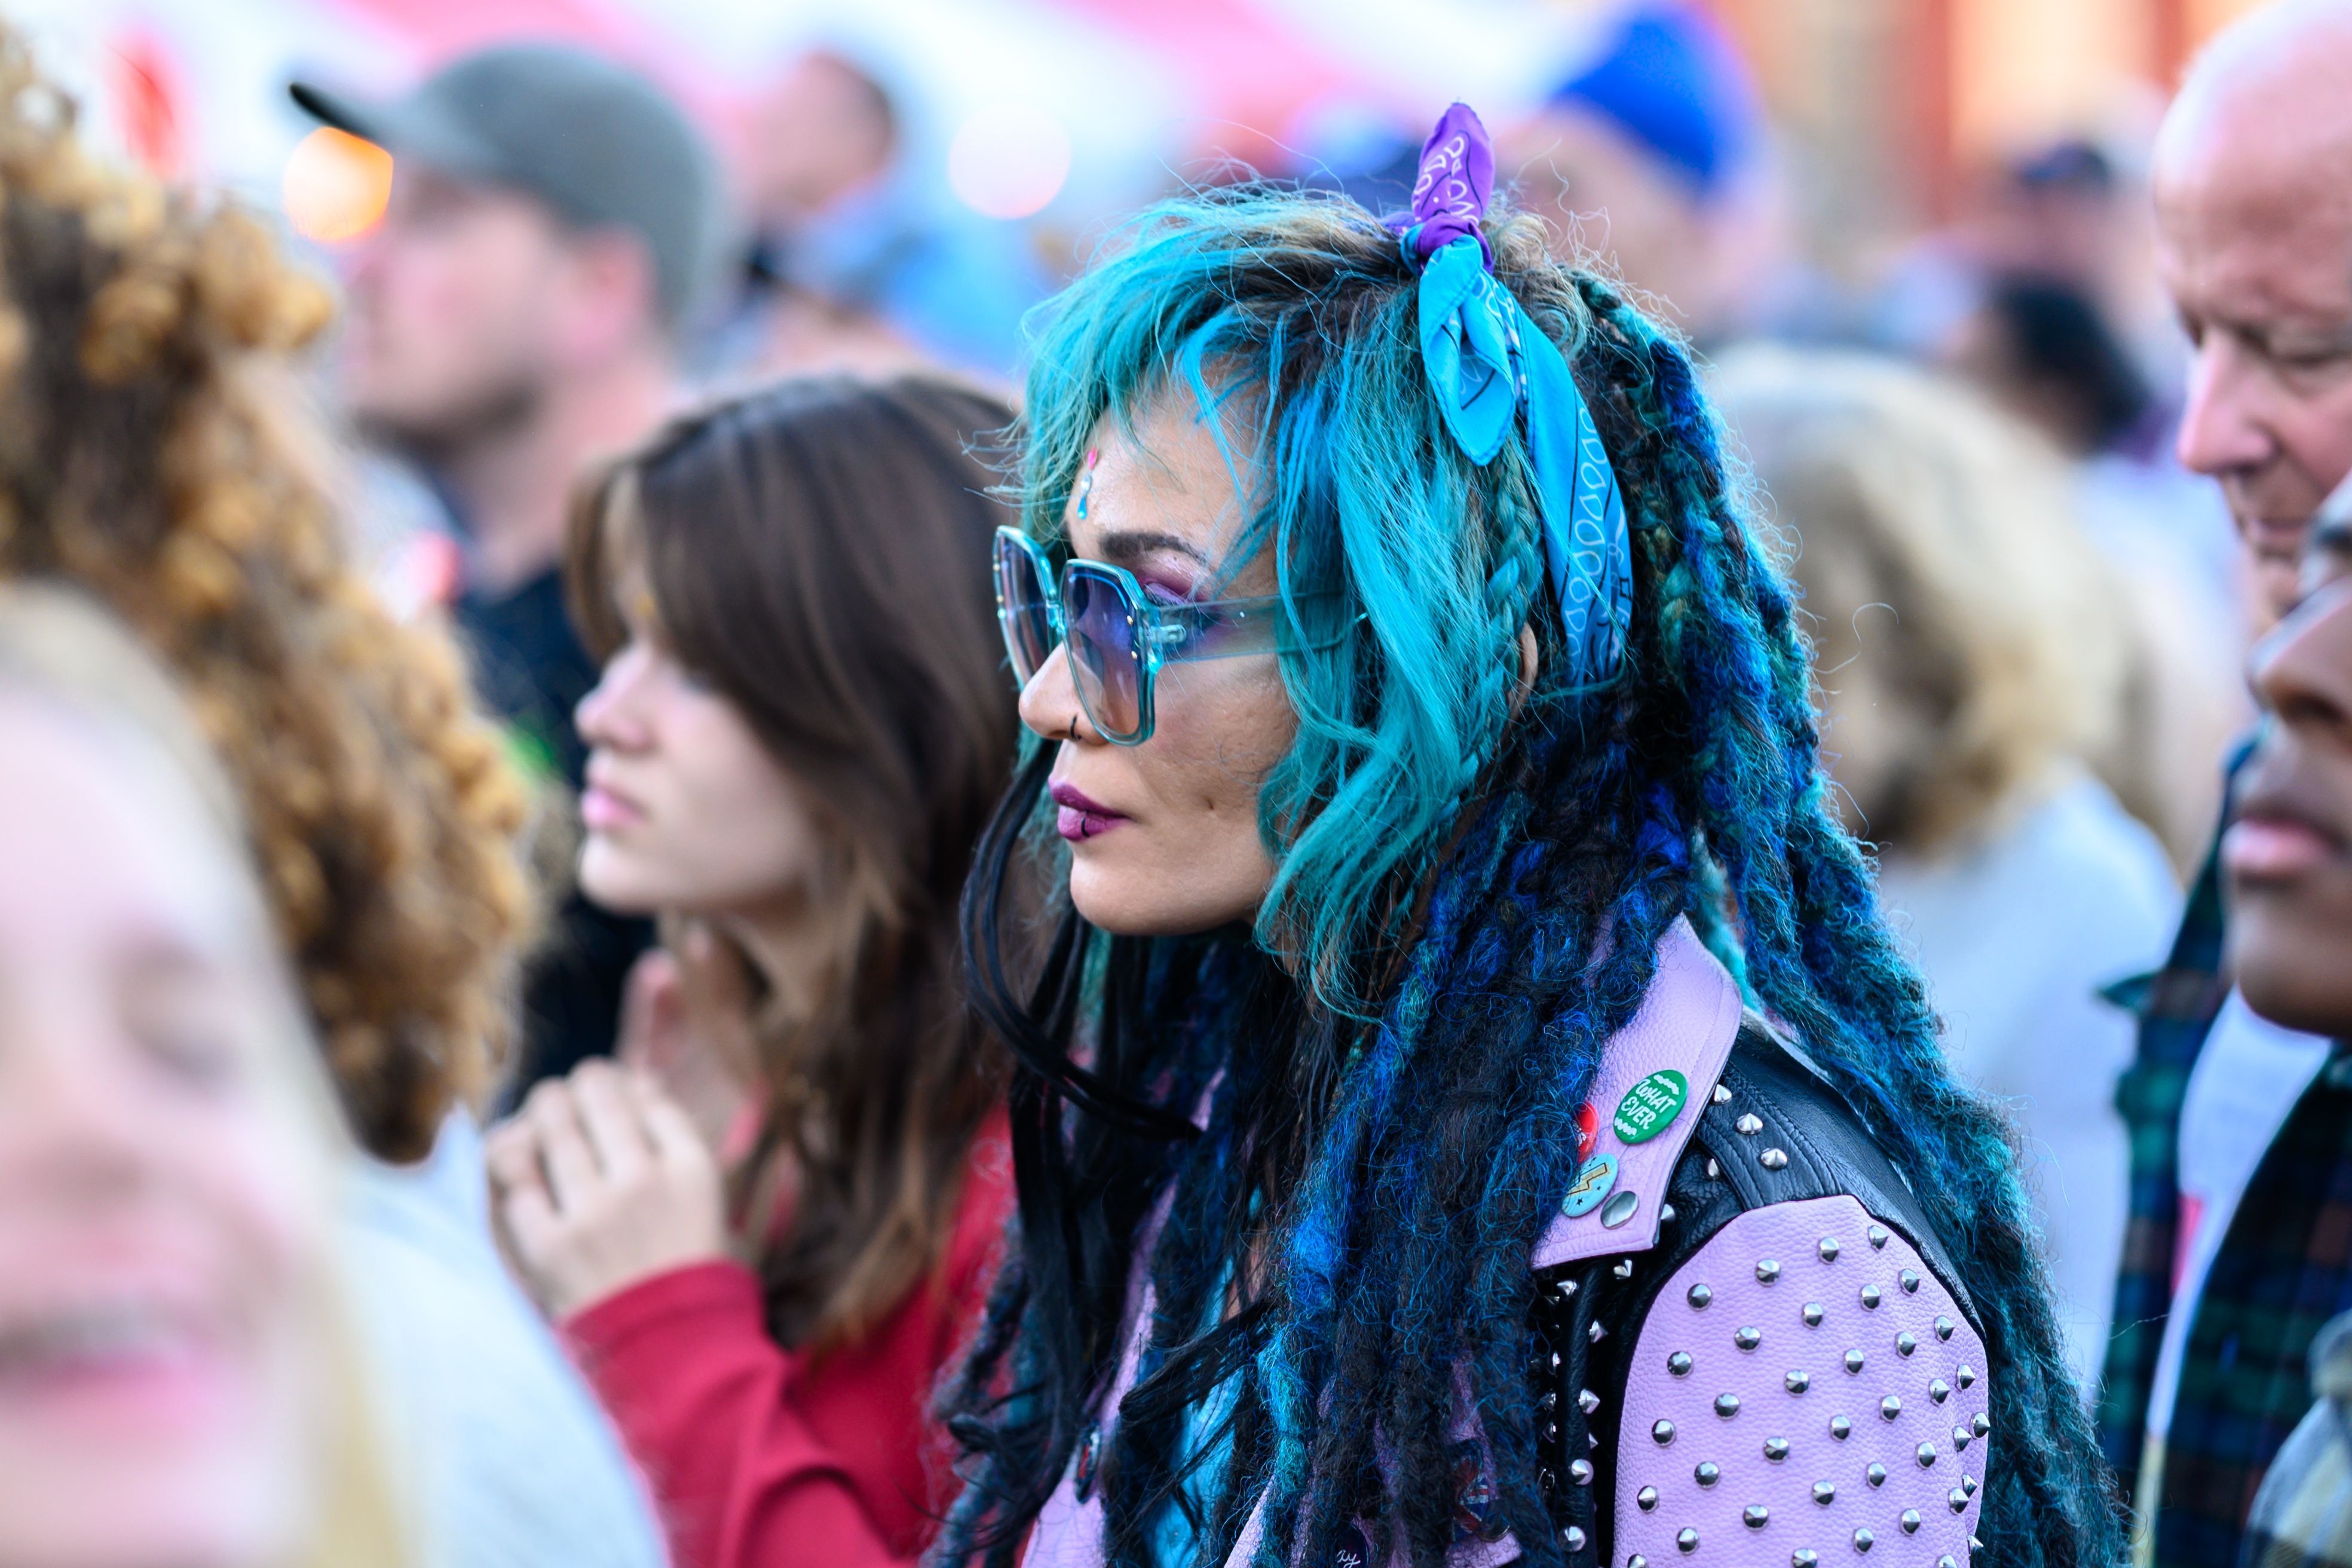 Woman with blue hair and glasses wearing pink leather jacket looks on at outdoor concert